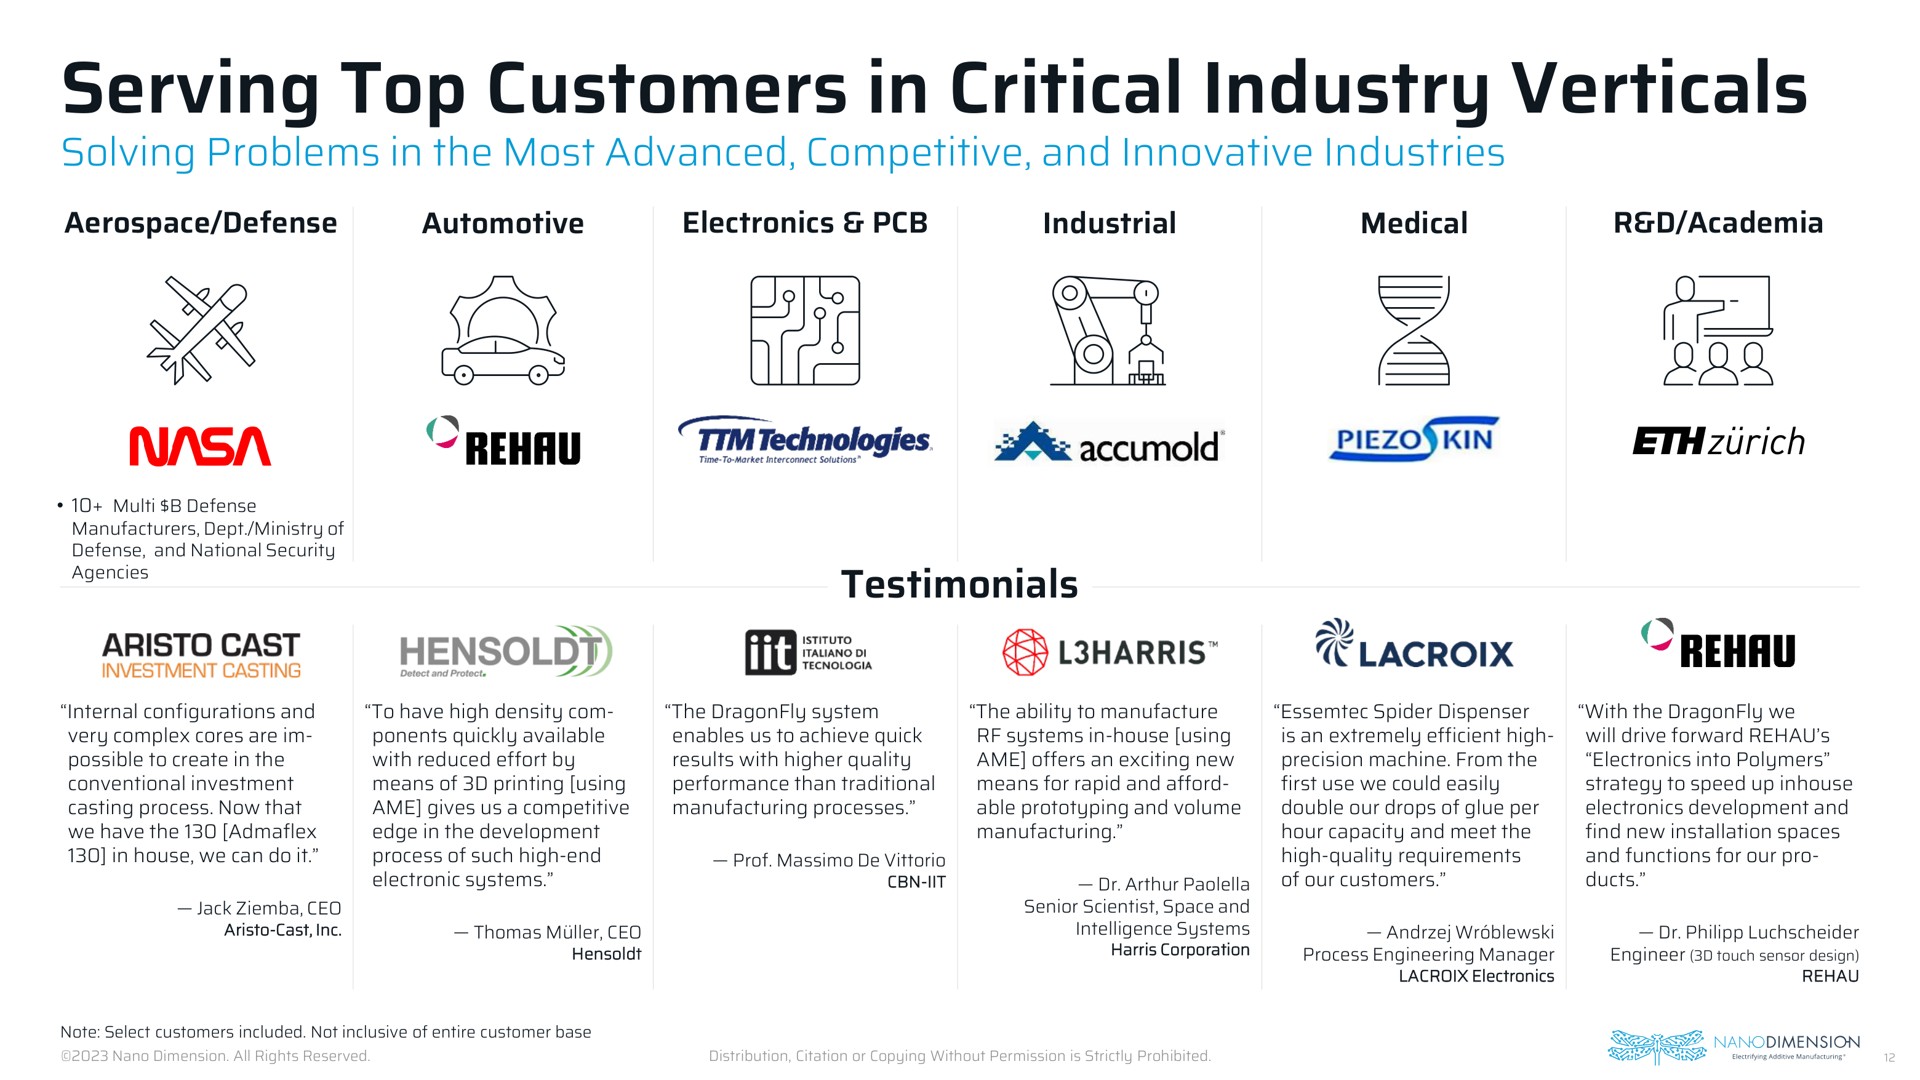 serving top customers in critical industry verticals cast | Nano Dimension